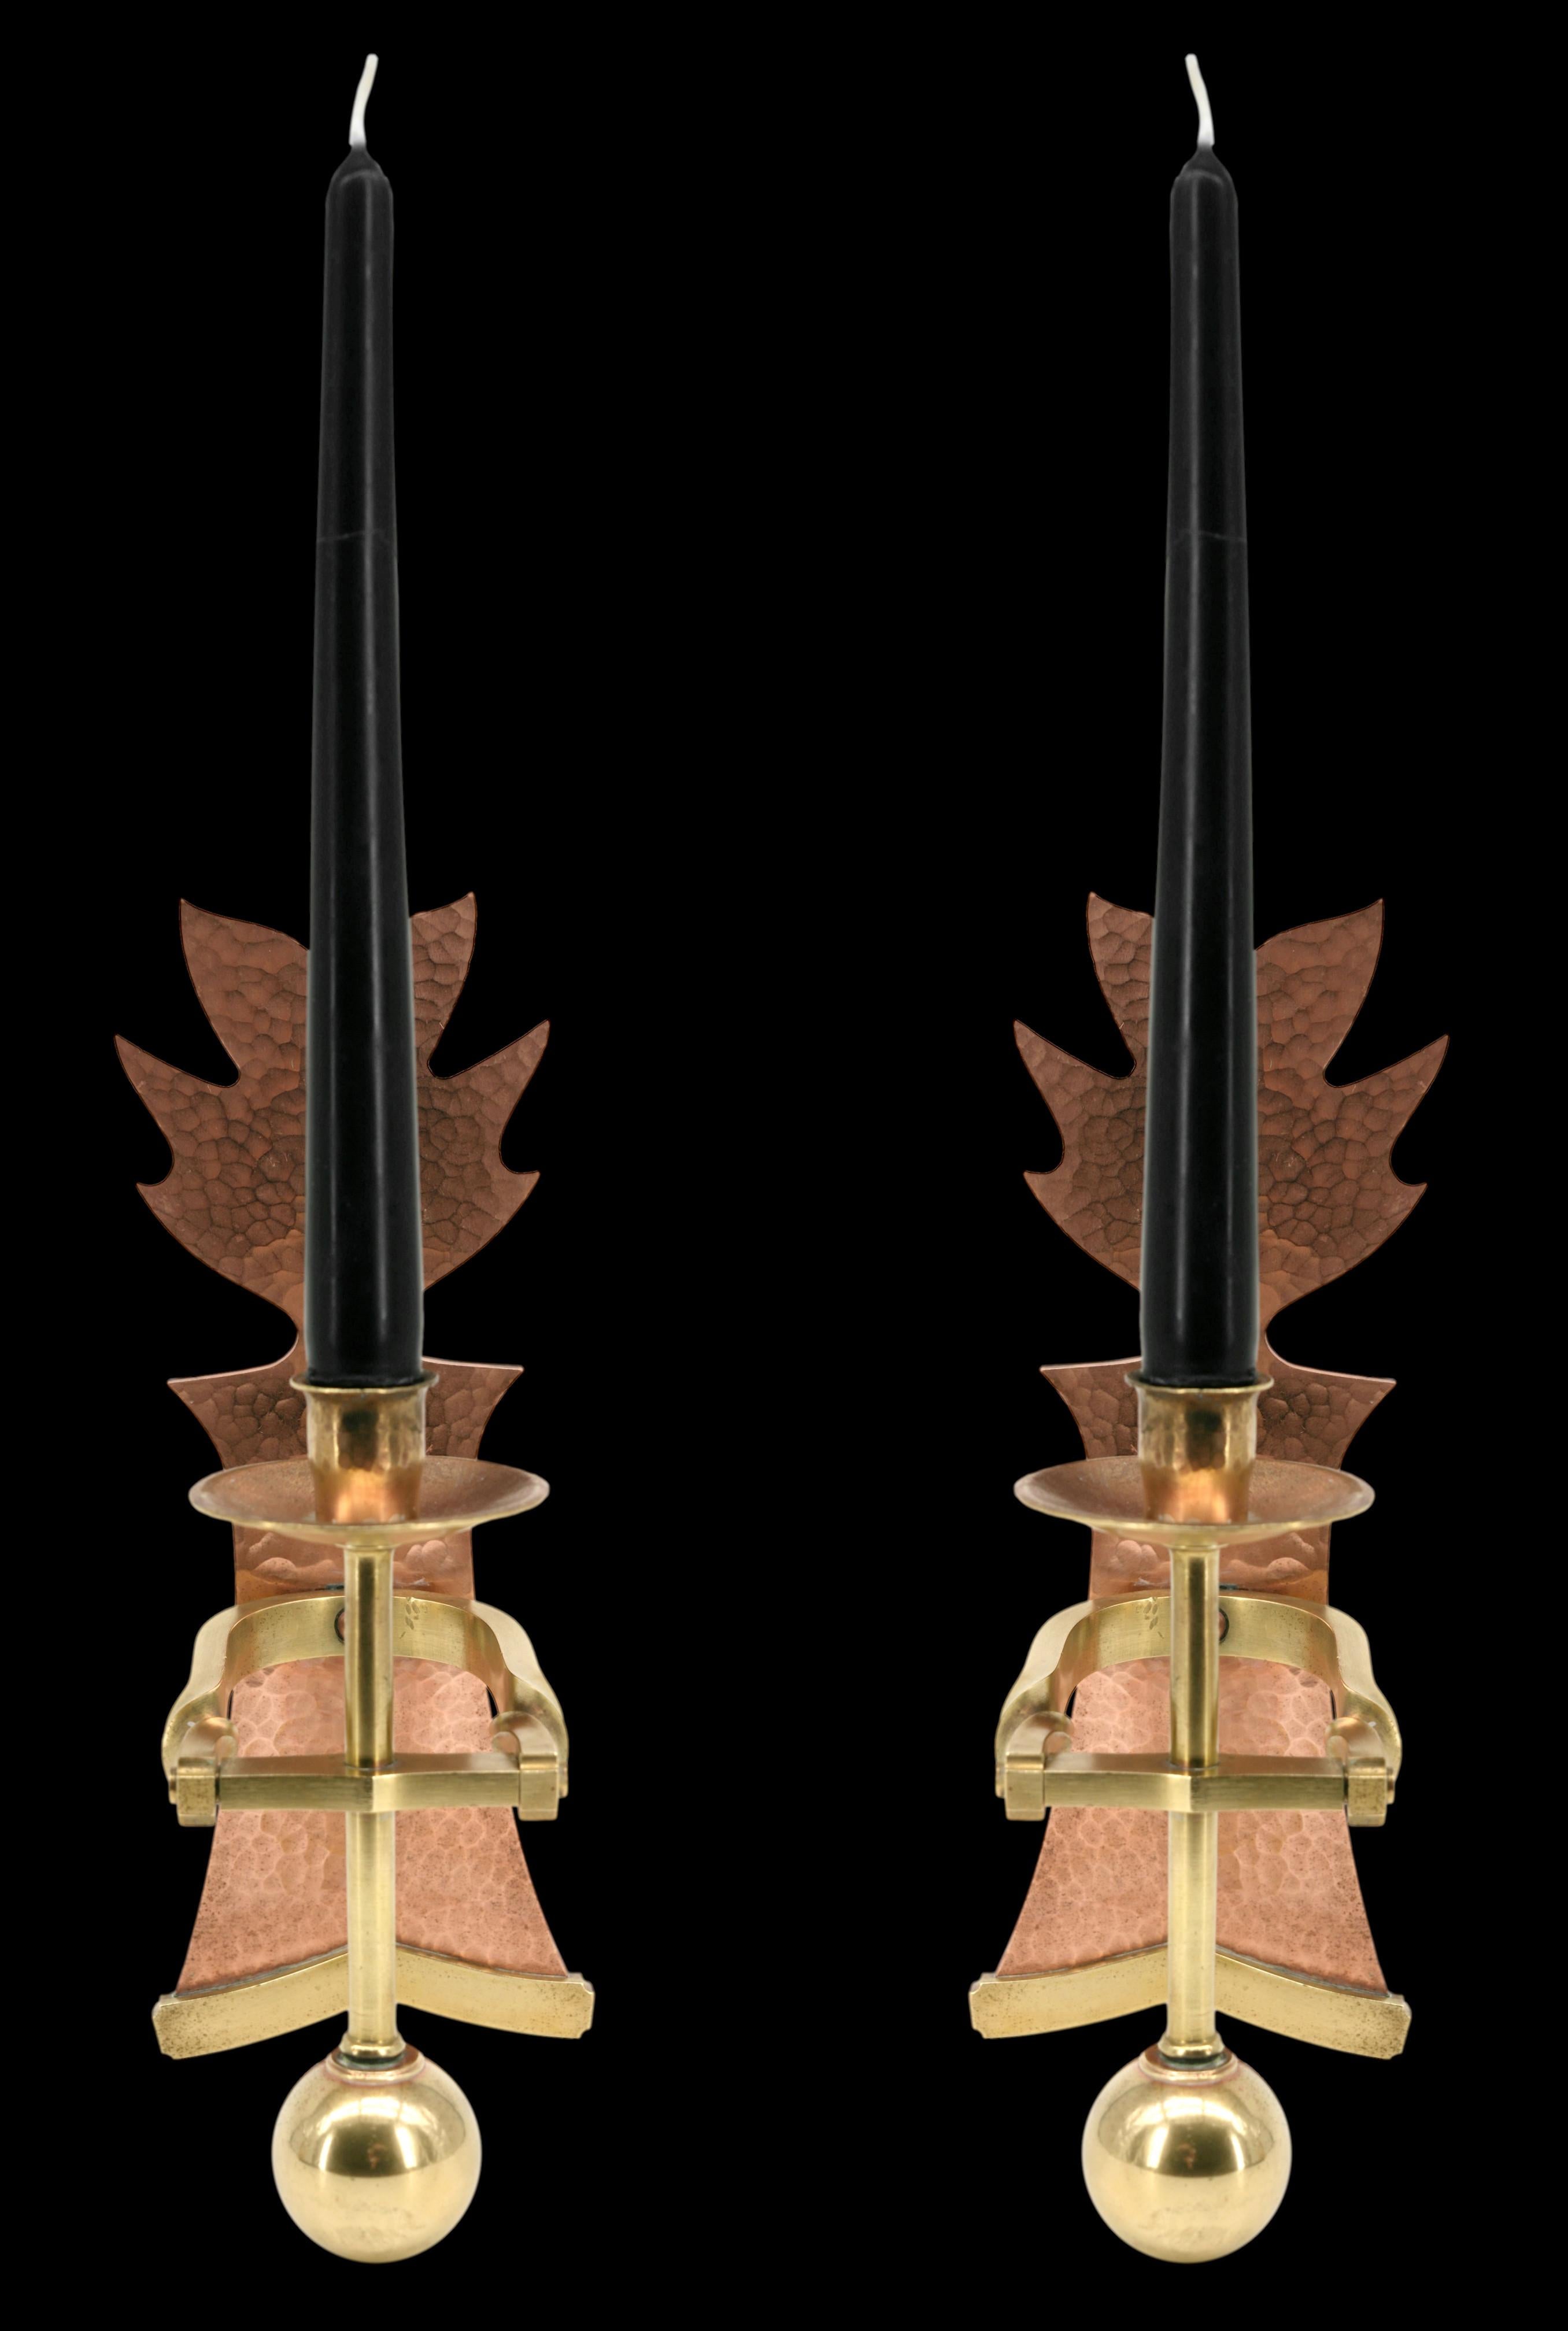 French Art Deco pair of boat candle sconces, France, 1940s. Bronze. Swiveling against pitch. Measures: Width: 4.25